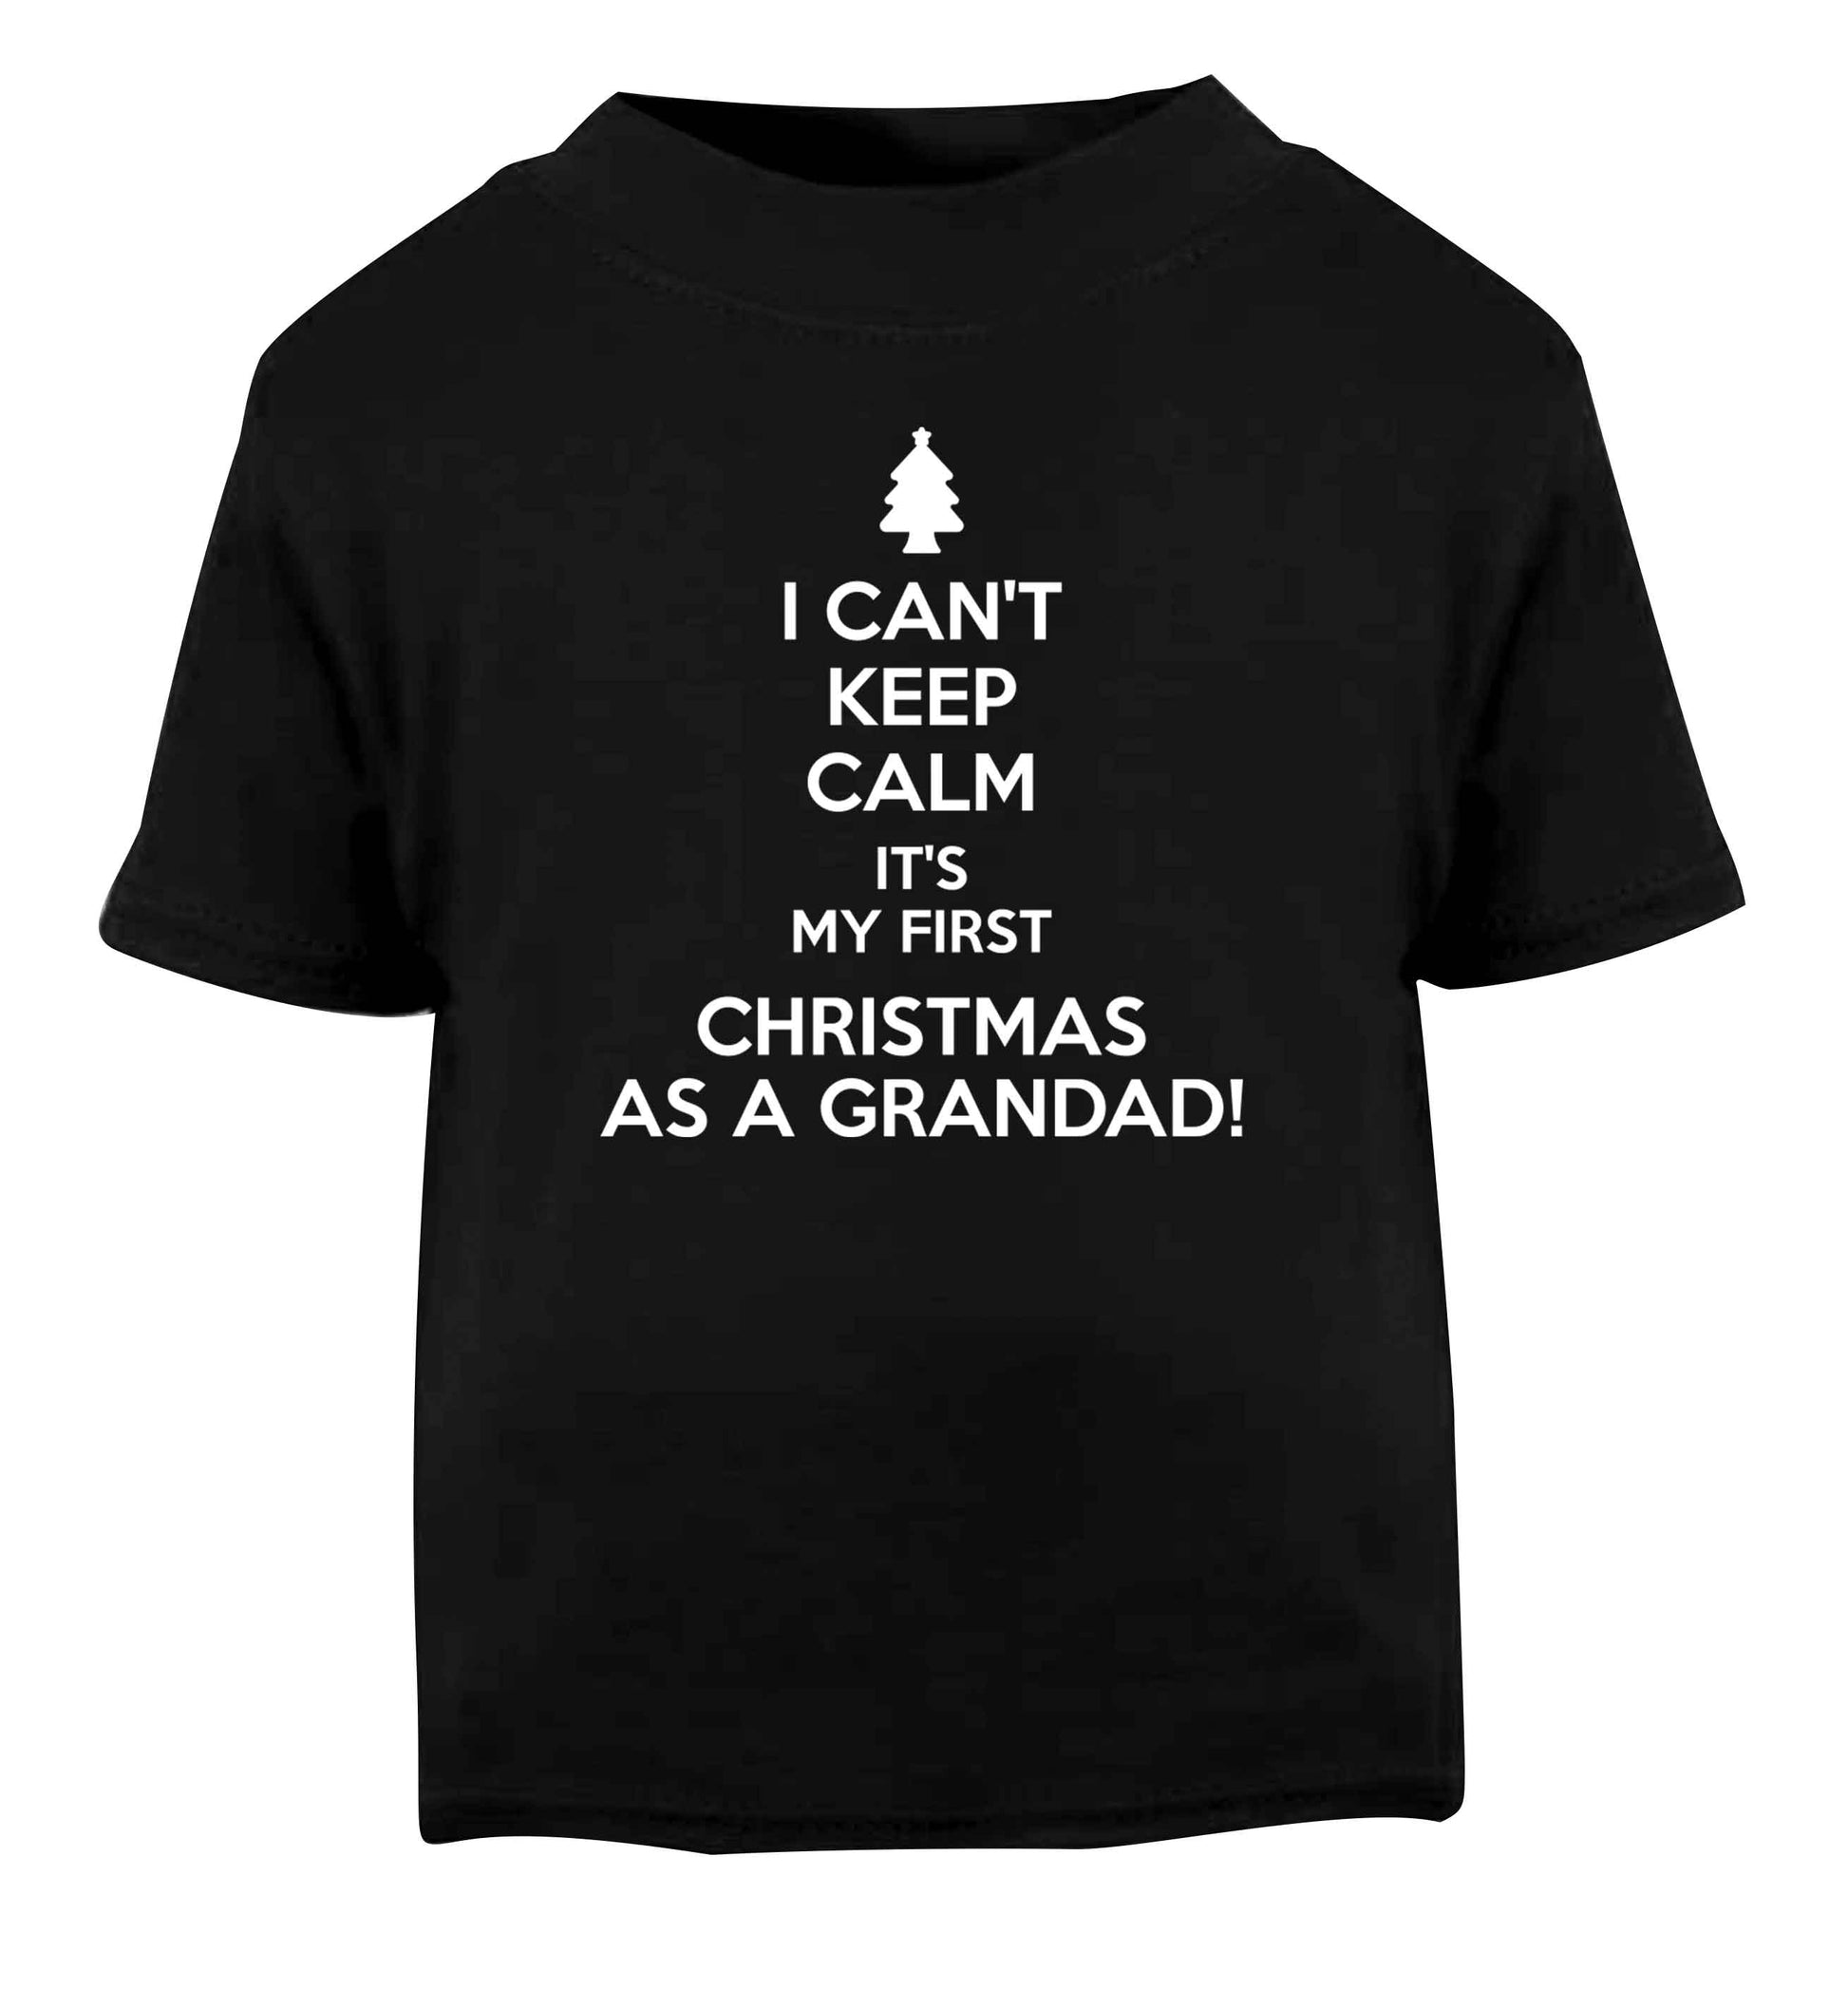 I can't keep calm it's my first Christmas as a grandad! Black Baby Toddler Tshirt 2 years